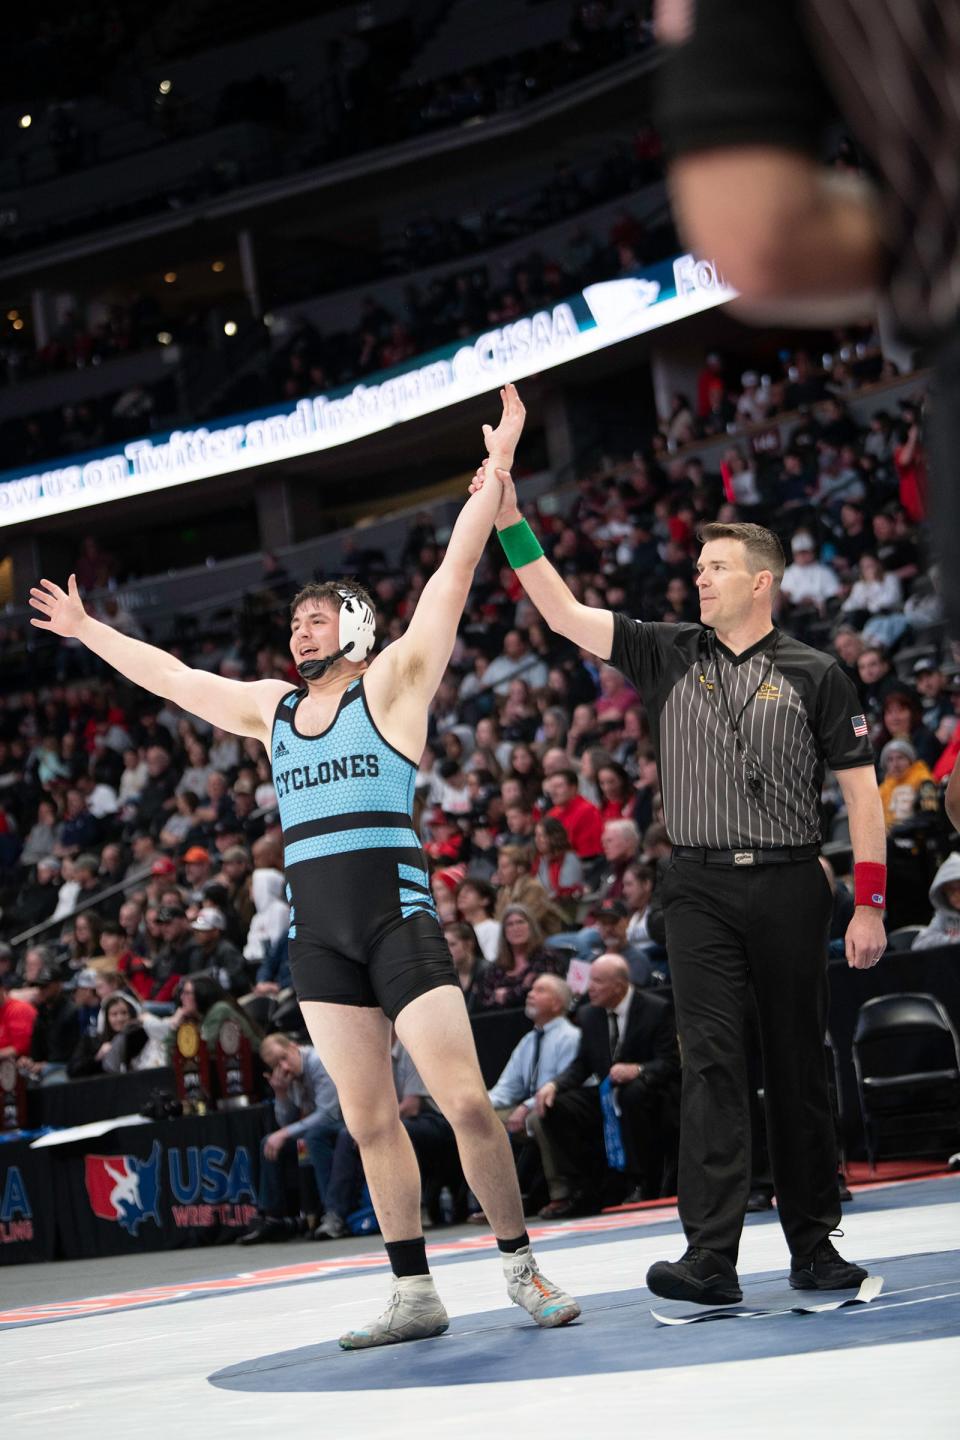 Pueblo West's Thomas Mayer has his hand raised as the winner of the 215-pound championship match of the Class 4A state wrestling tournament at Ball Arena on Saturday.